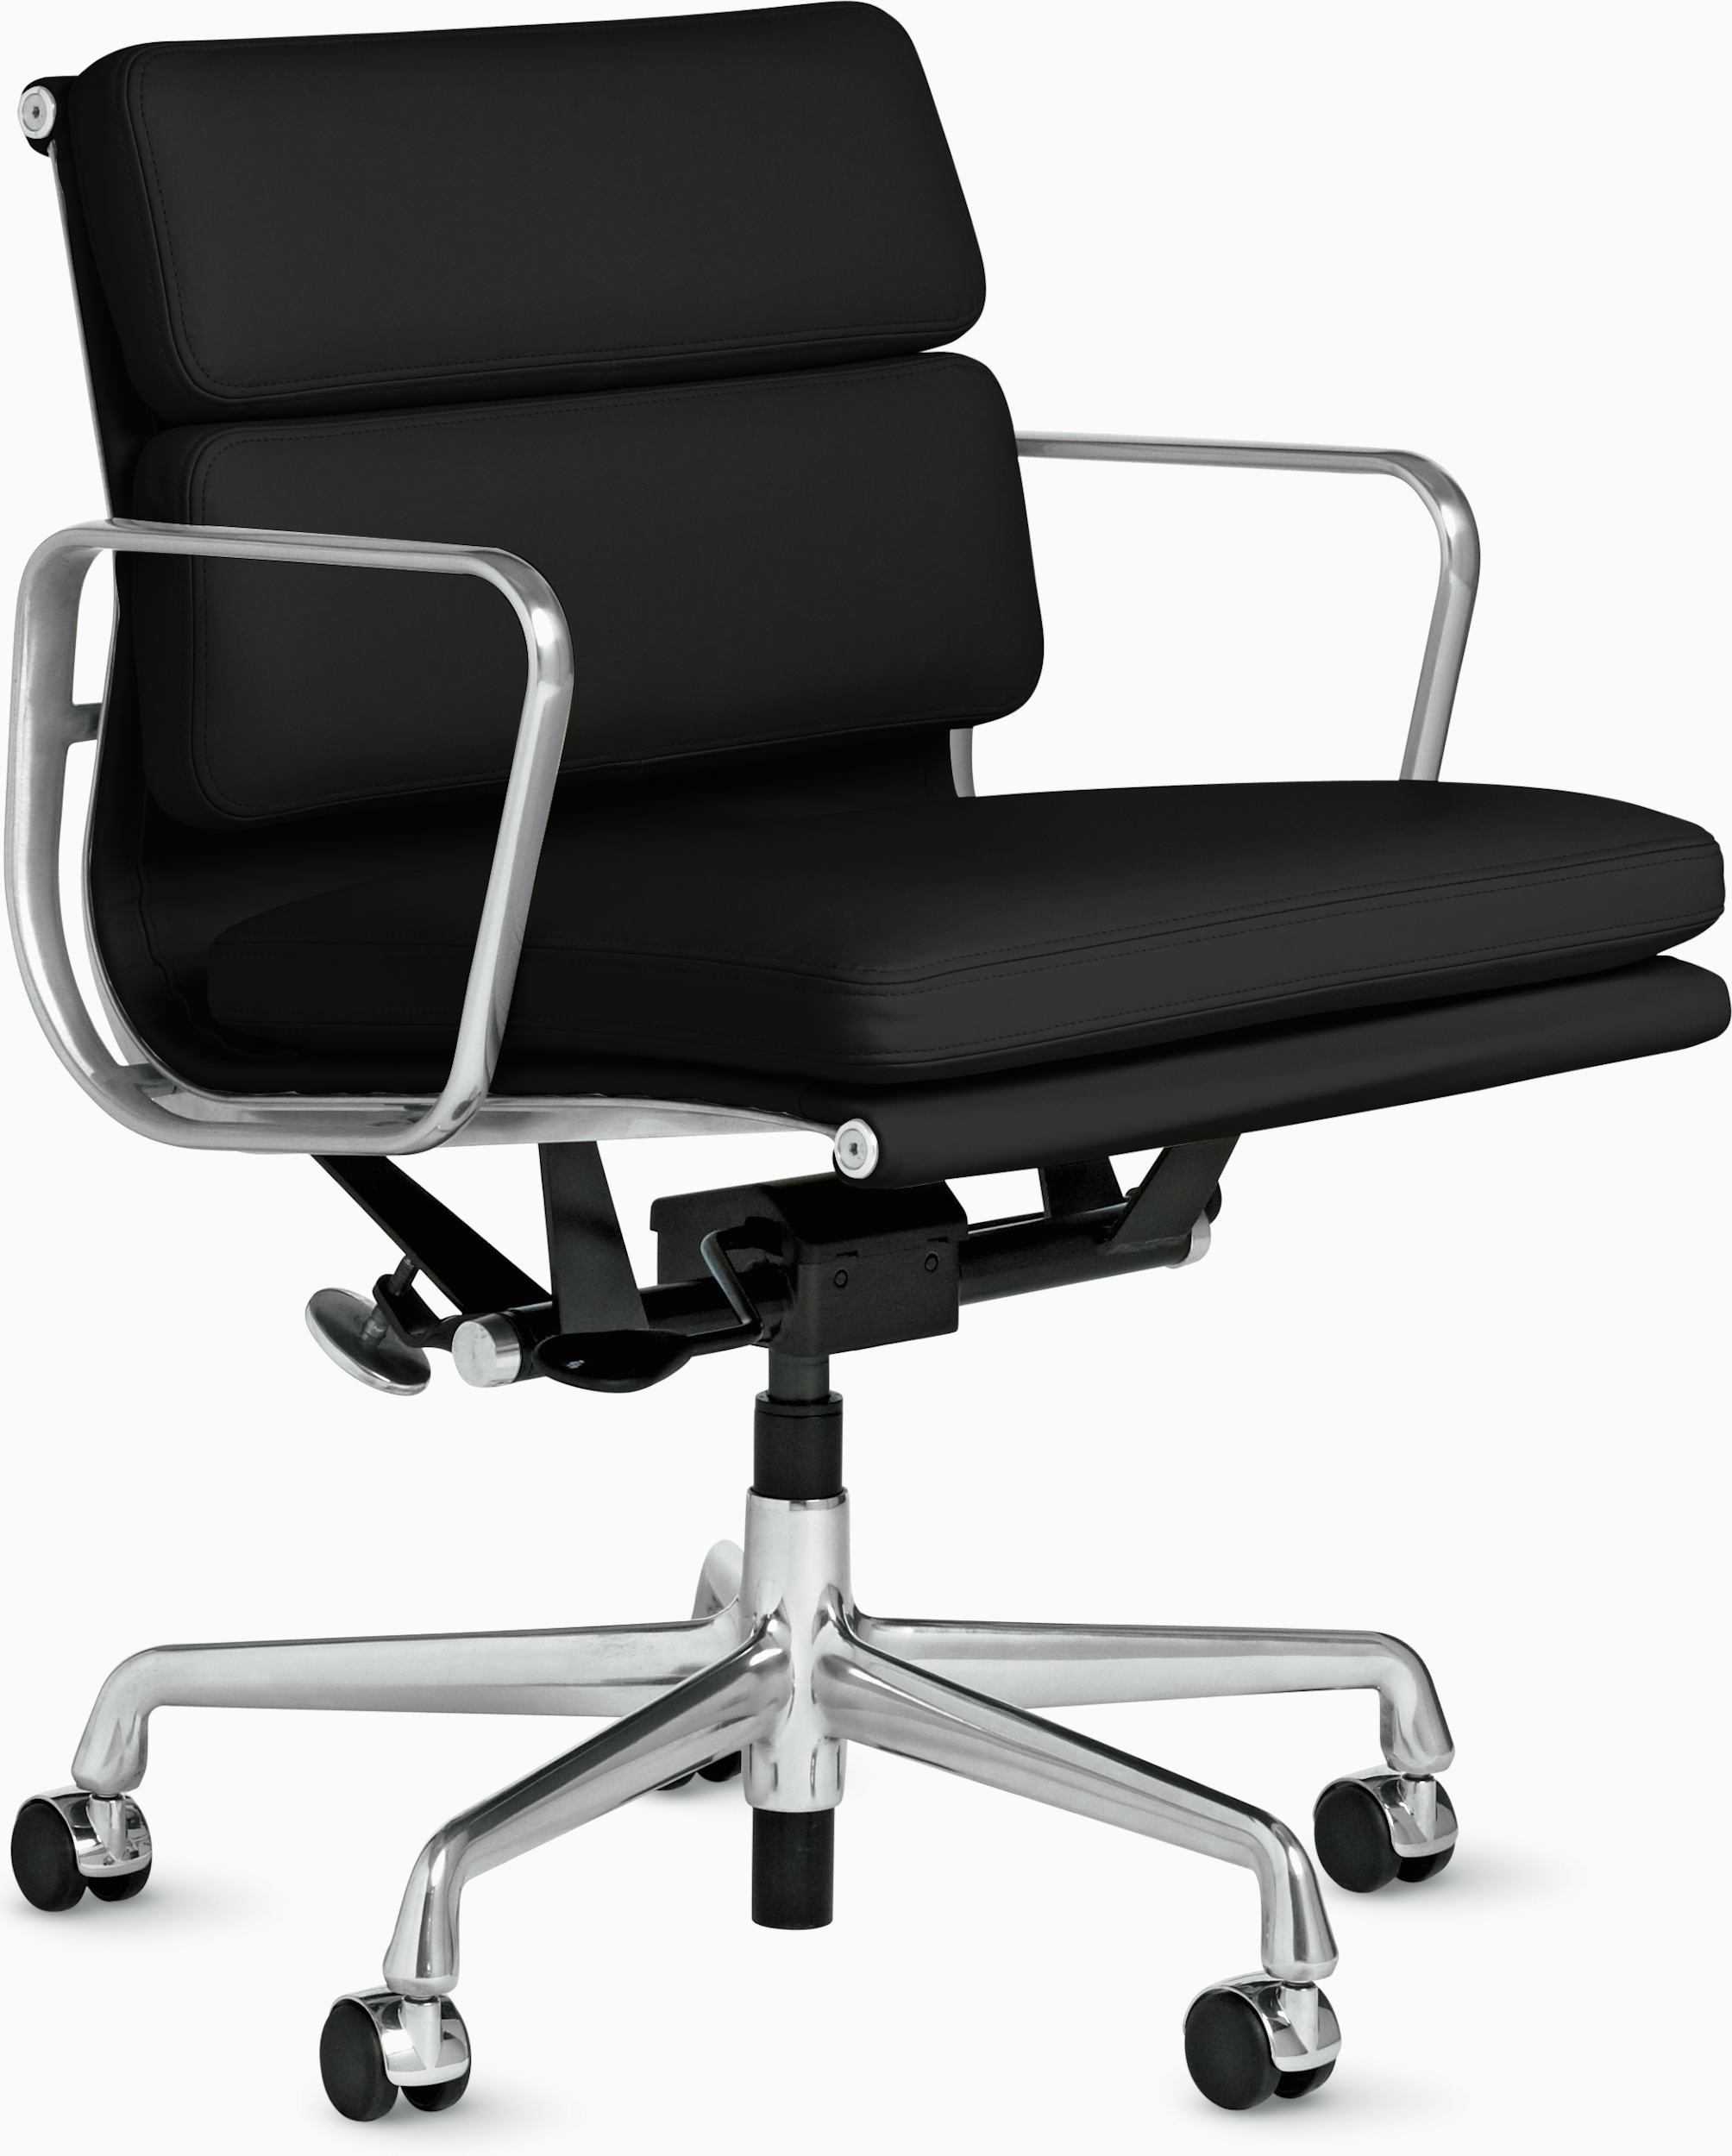 Quality assurance Eames Soft Pad Management Chairs by Charles & Ray Eames  for Herman Miller in Fabric, pad for chair 